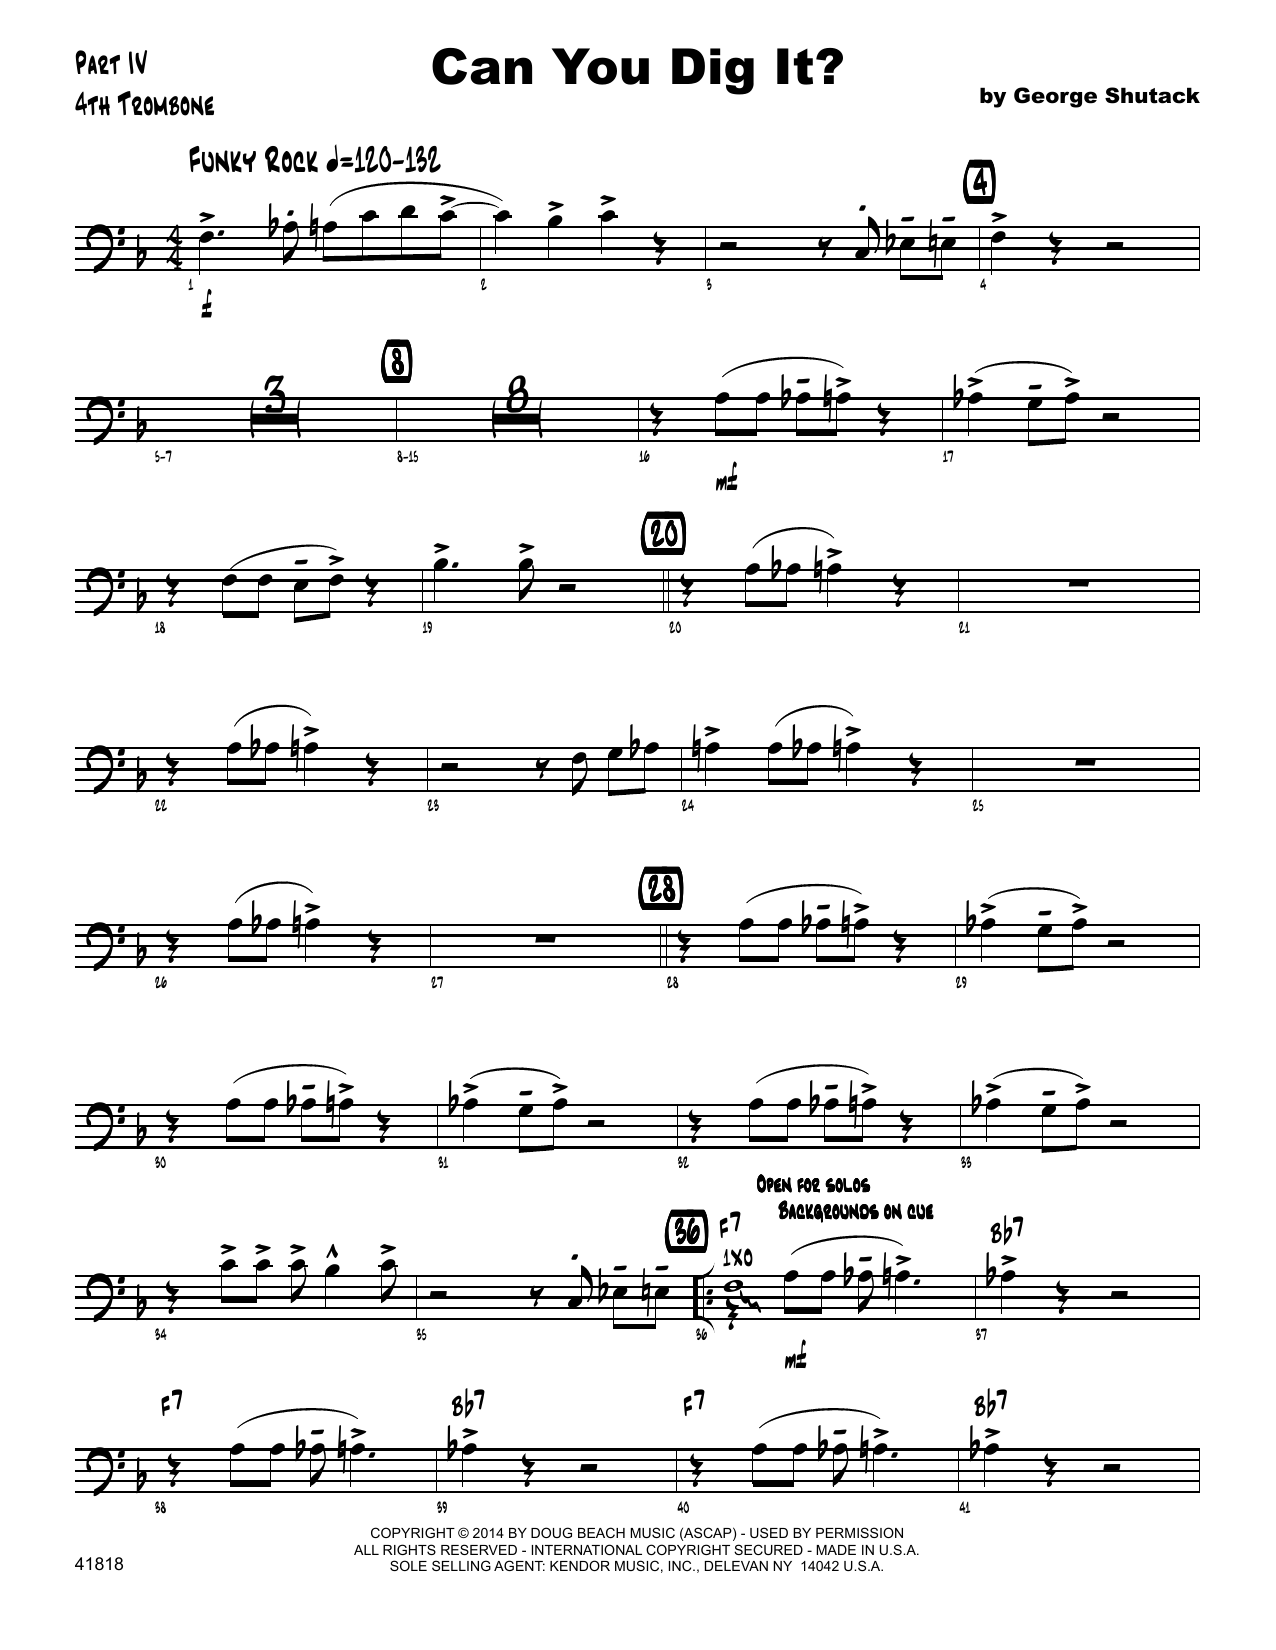 Download George Shutack Can You Dig It? - 4th Trombone Sheet Music